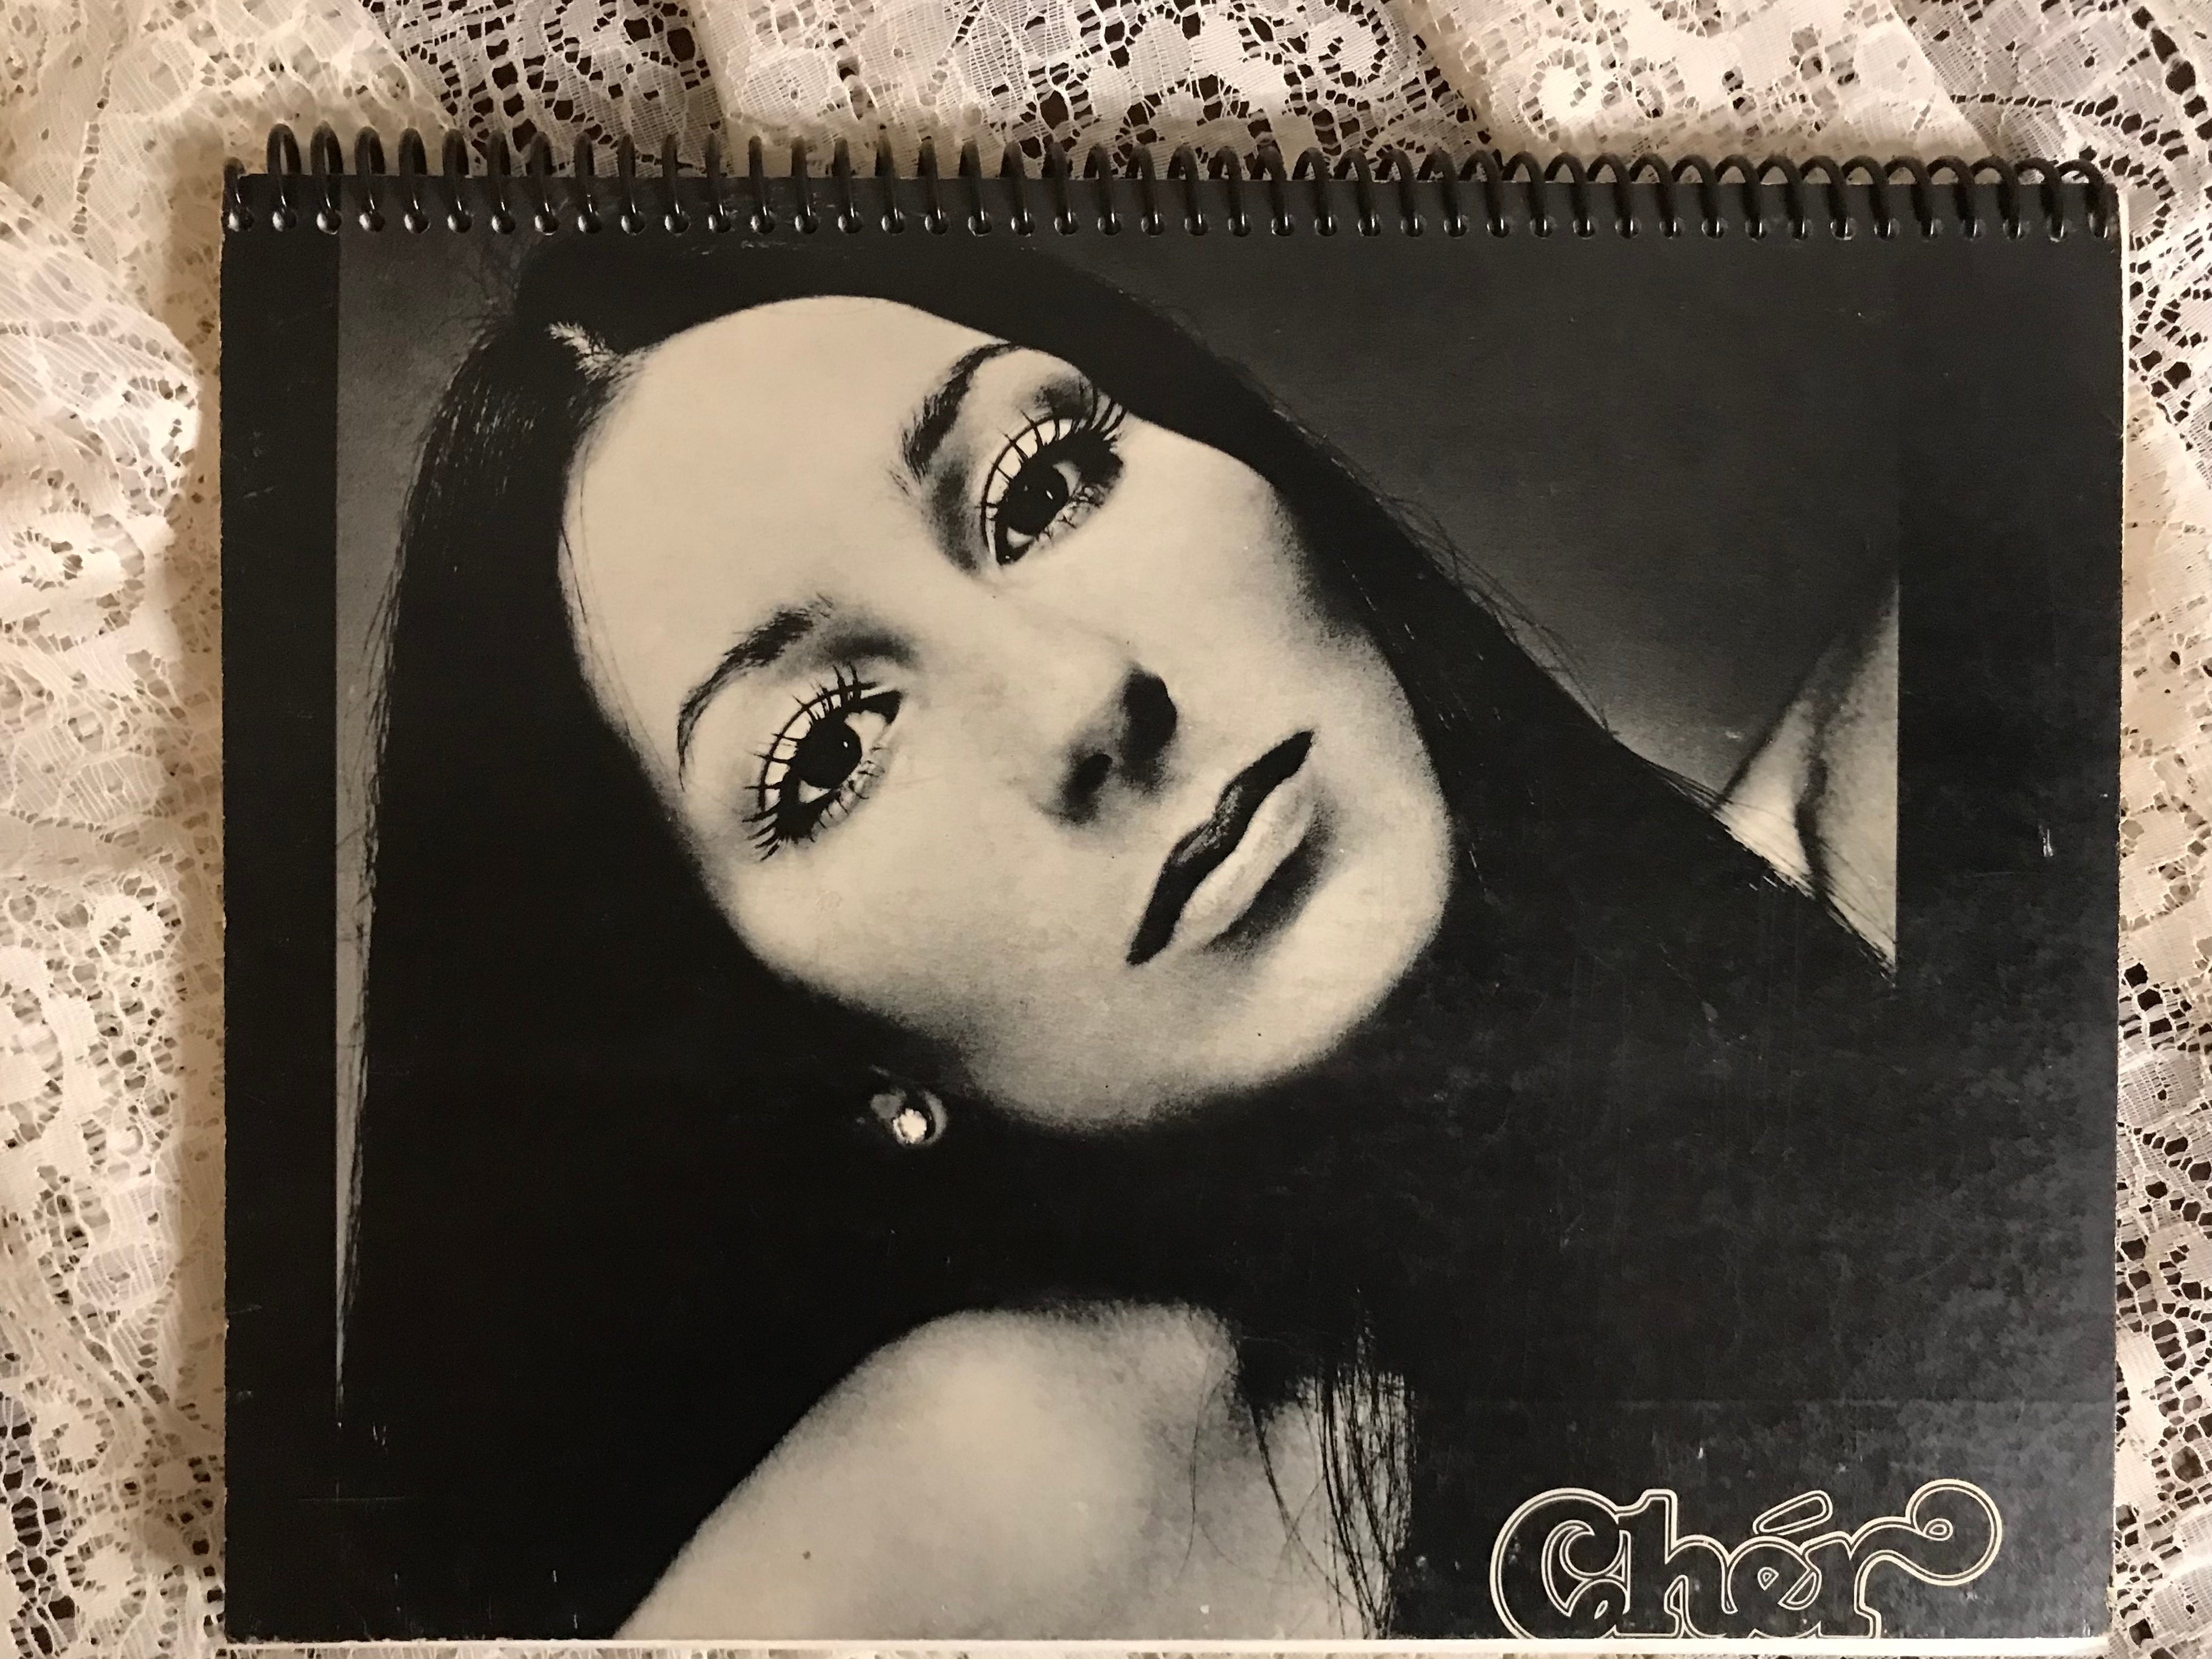 Cher Gypsies Tramps and Thieves Album Cover Notebook